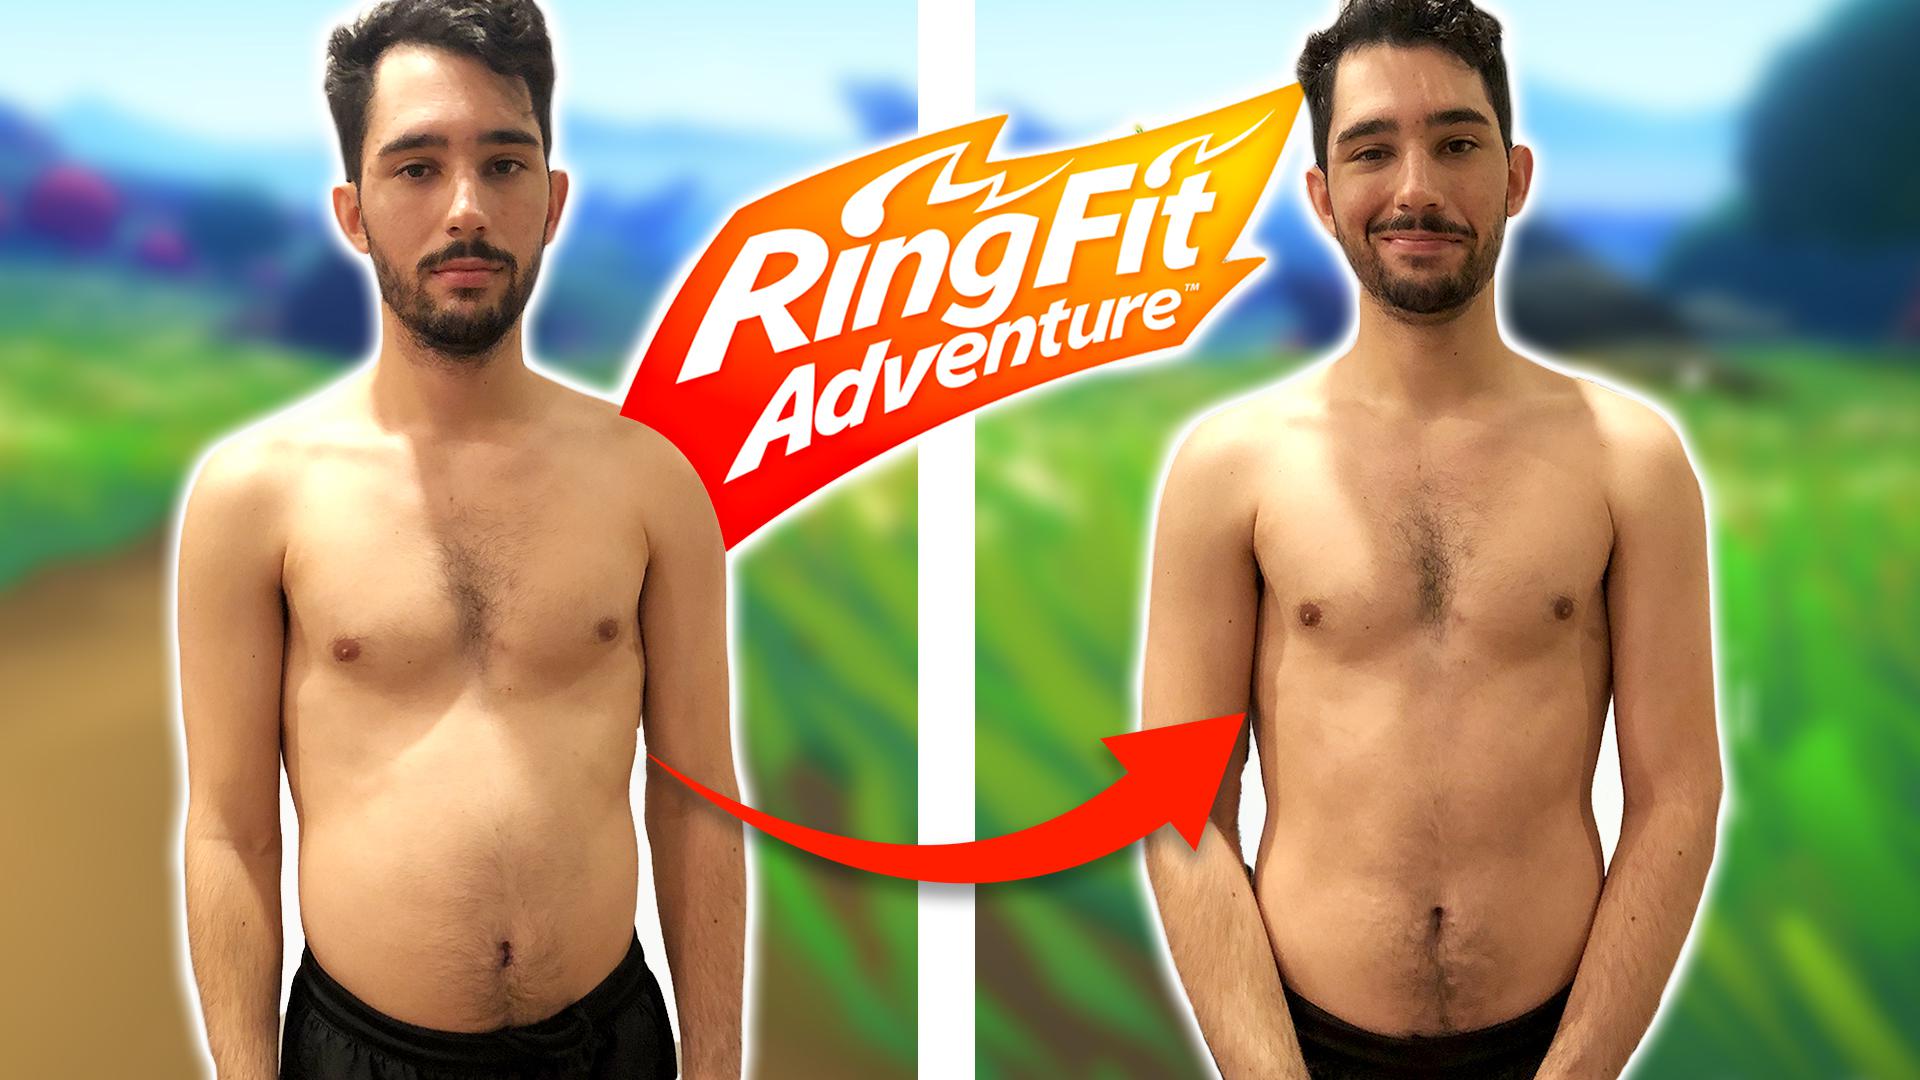 We Work Out With Nintendo Ring Fit Adventure For 30 Days